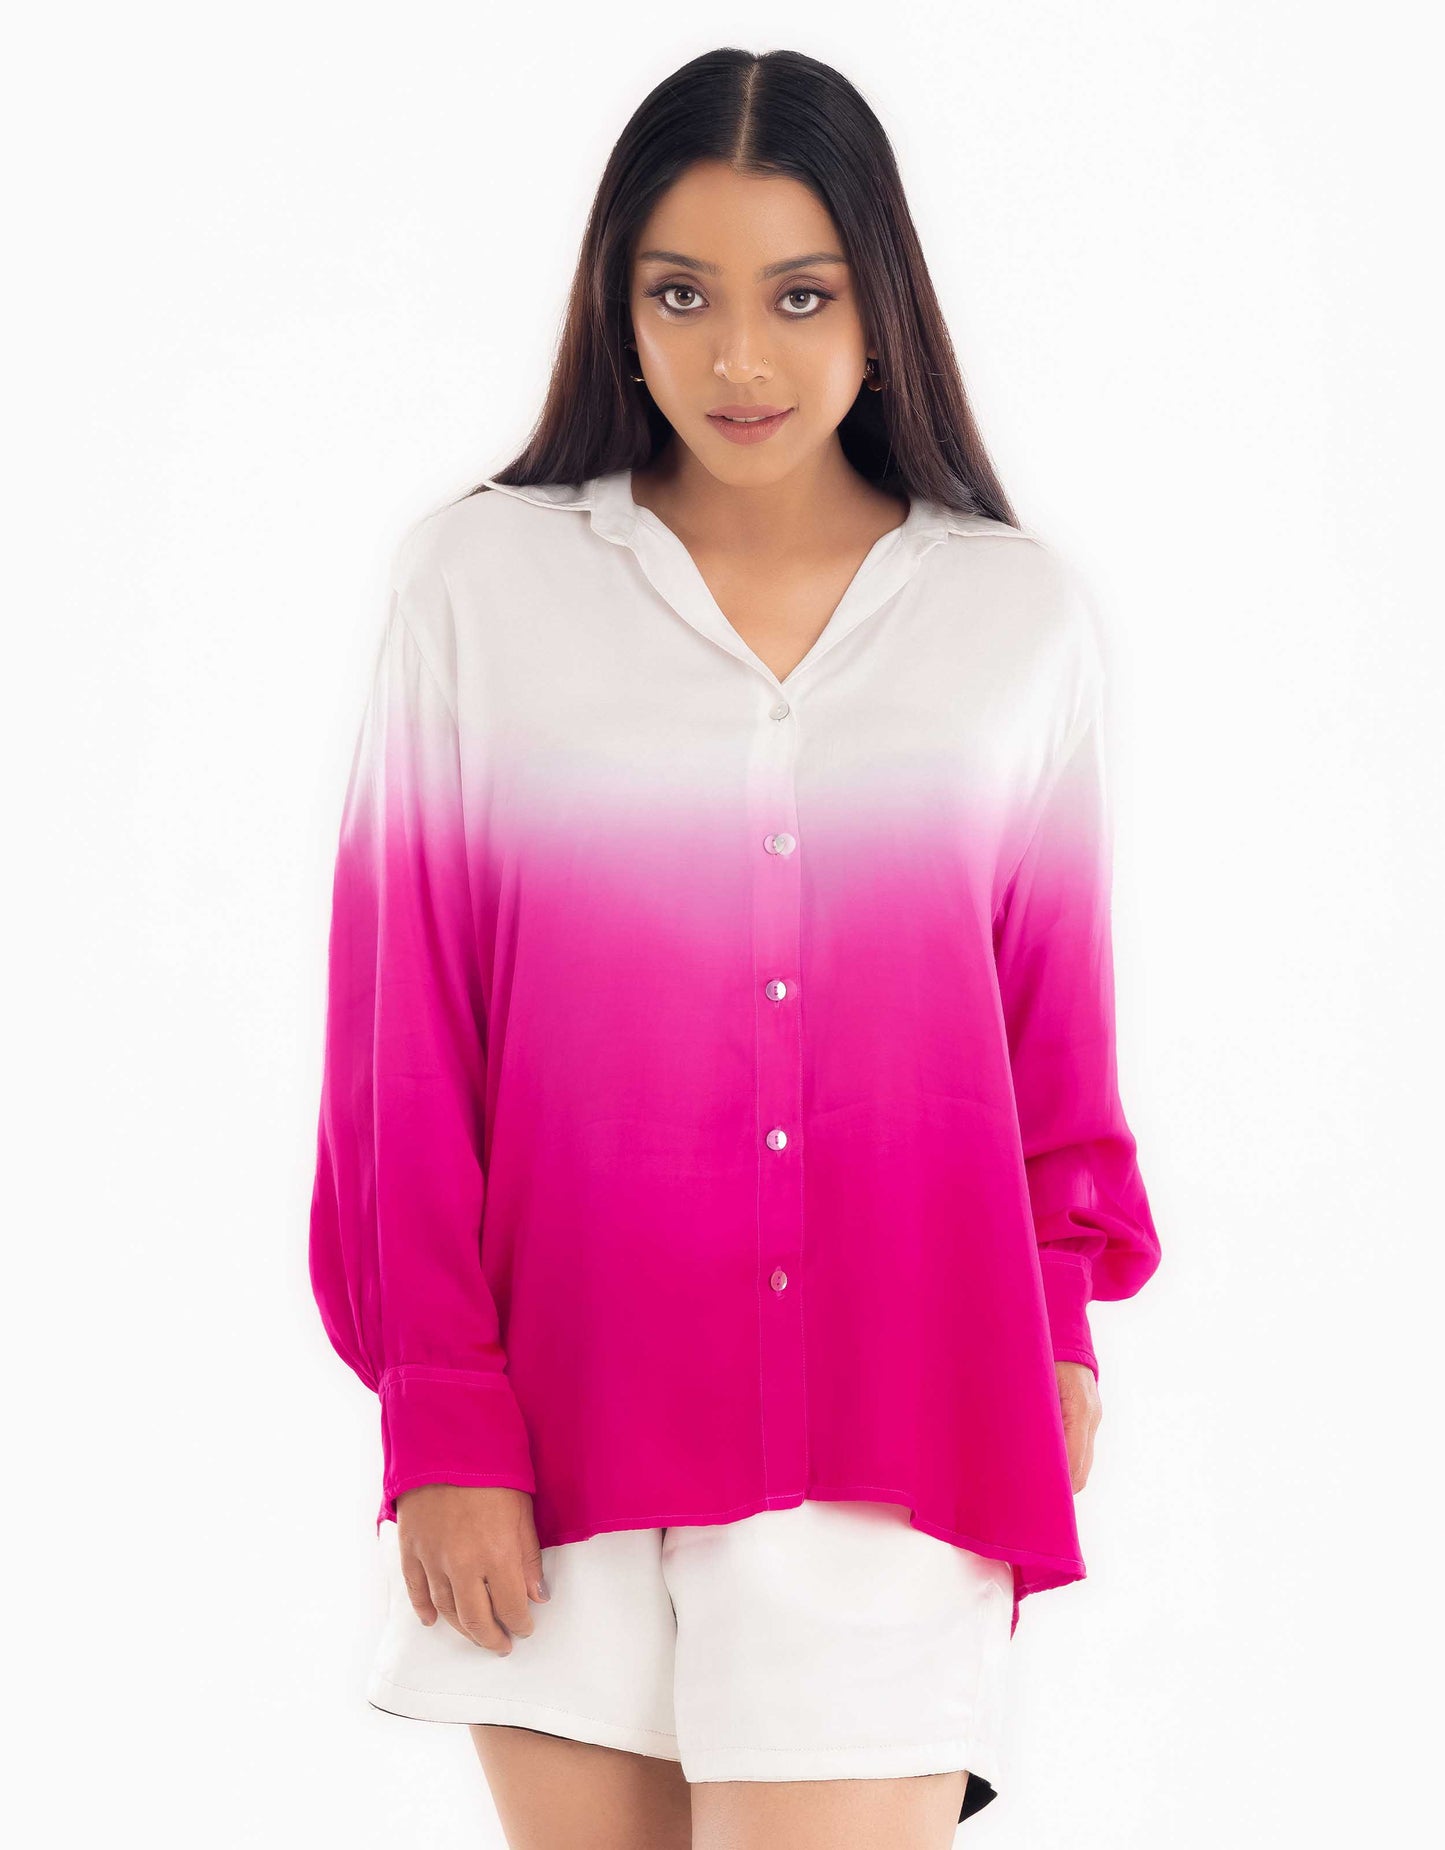 Hueloom pink convertible ombre oversized shirt front view in regular shirt style.